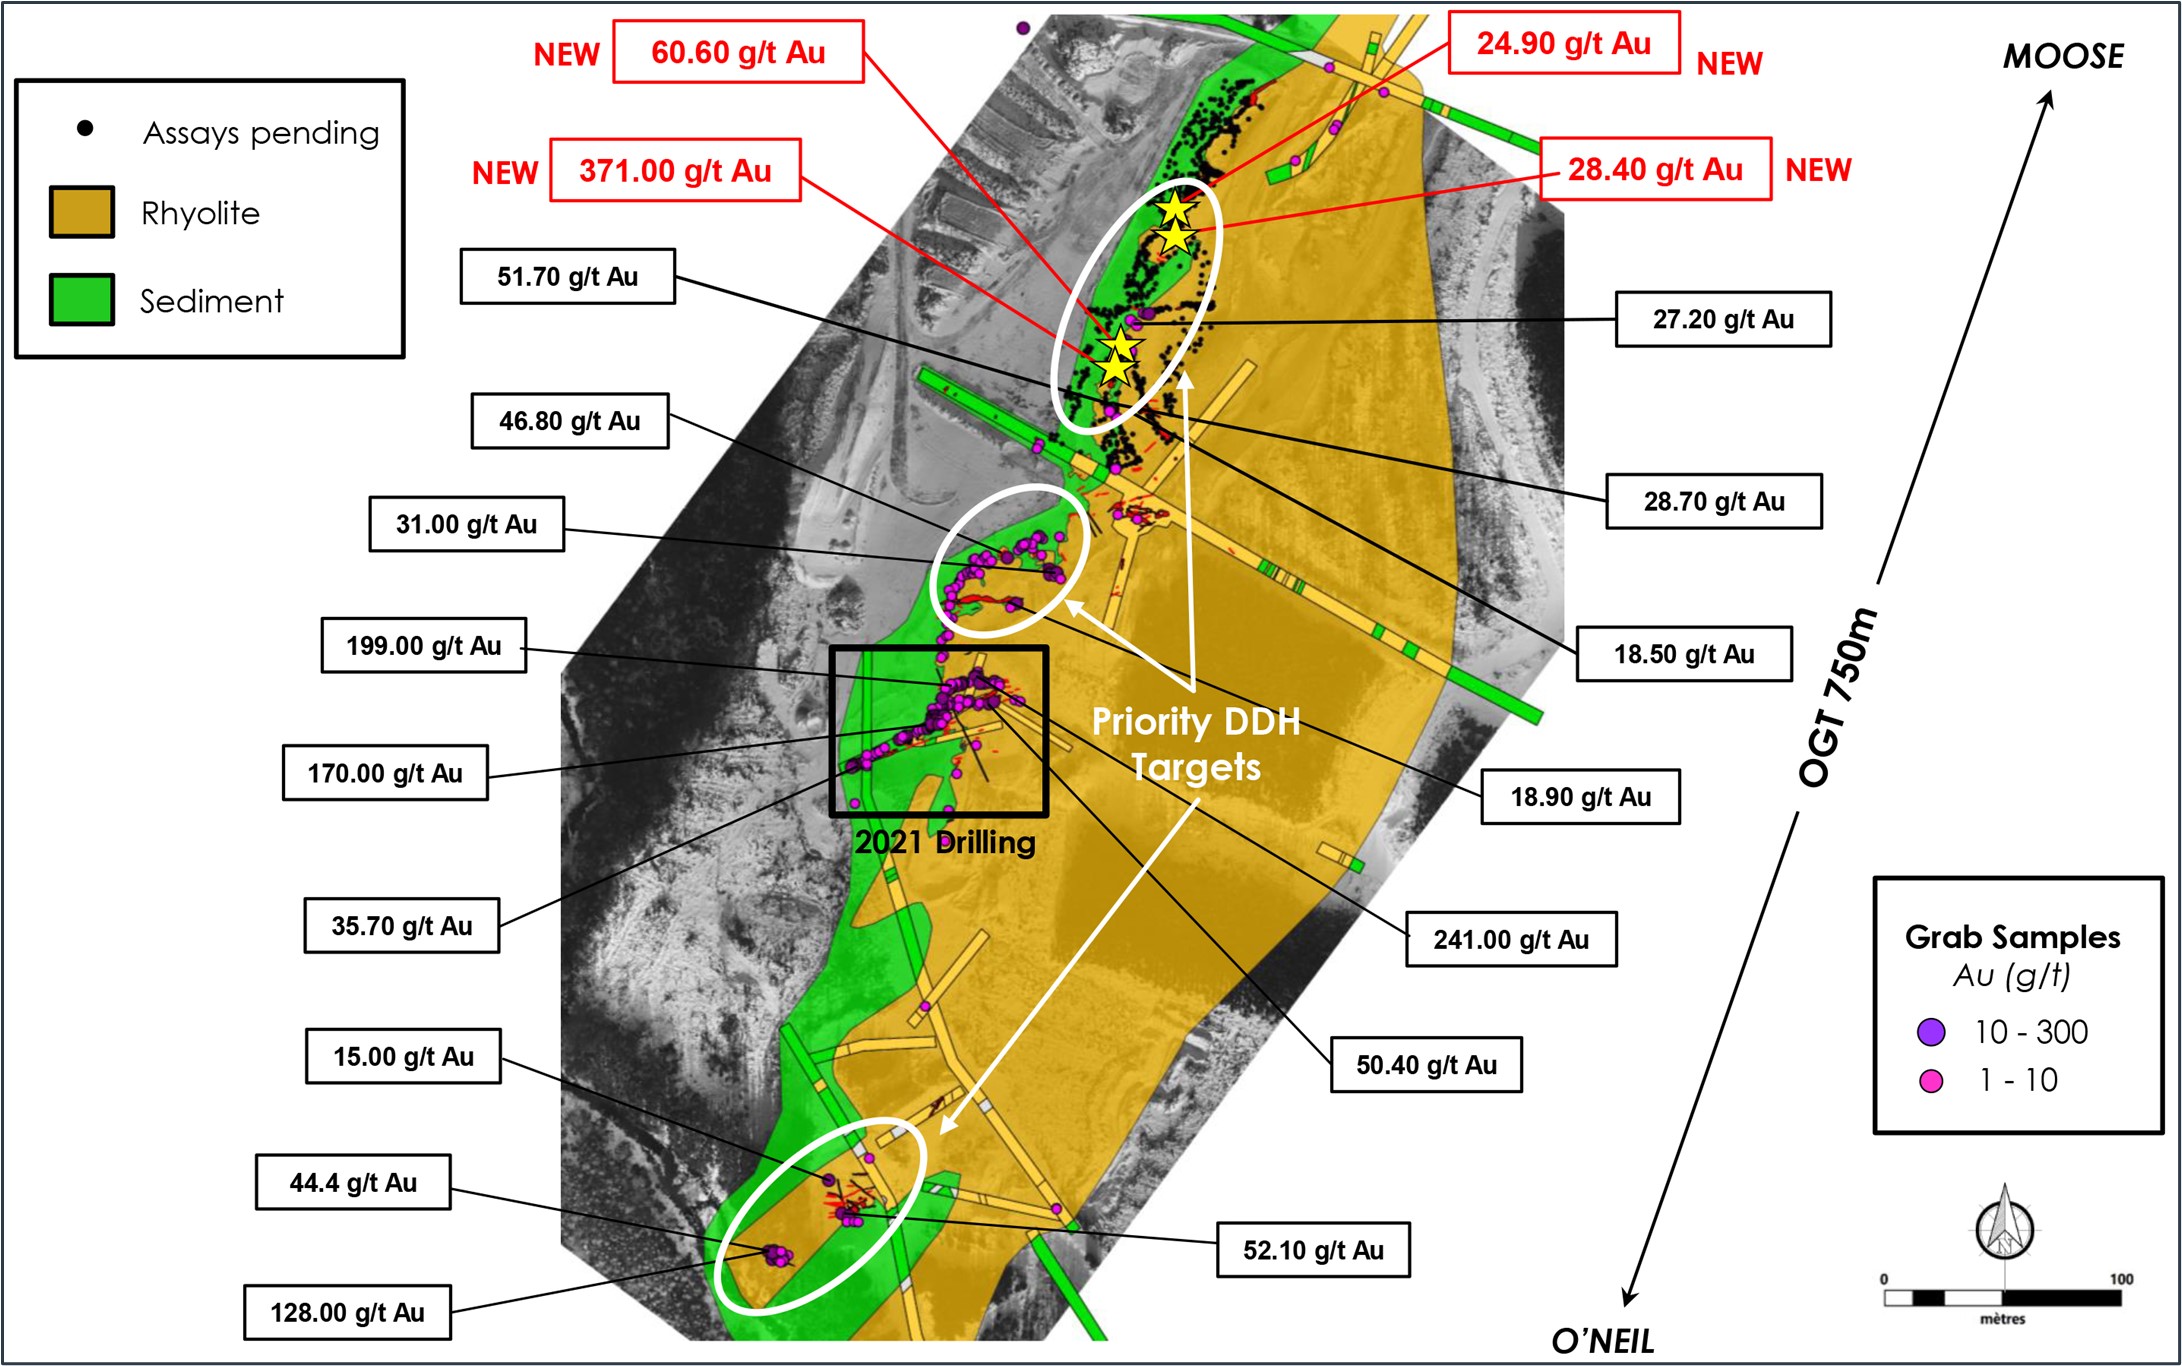 Figure 1: Location of reported grab samples at the OGT and associated first priority drilling targets